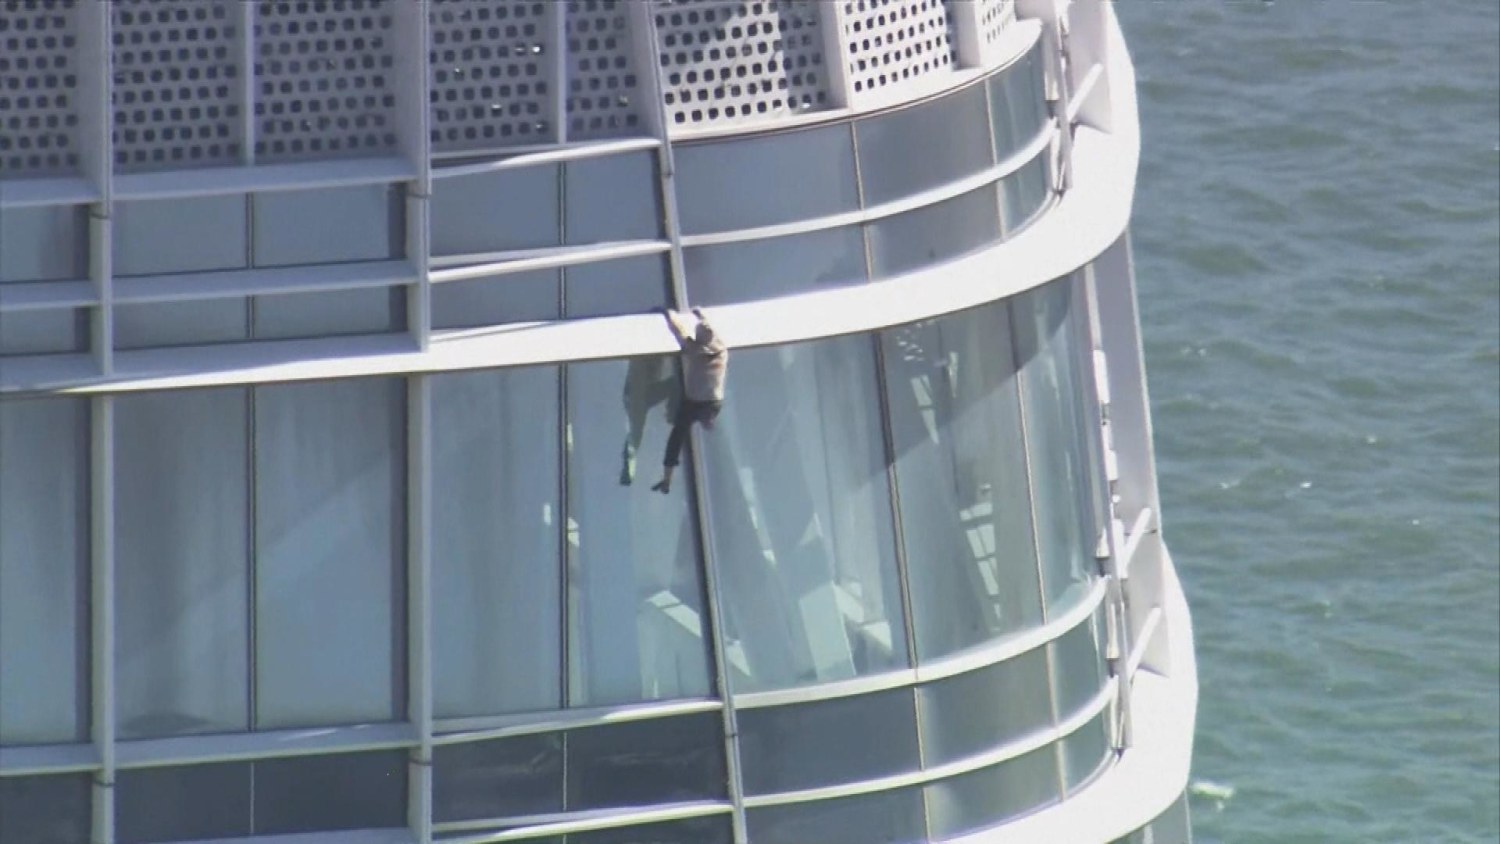 WATCH: Anti-abortion activist scales 60-floor San Francisco Salesforce Tower, is arrested on rooftop